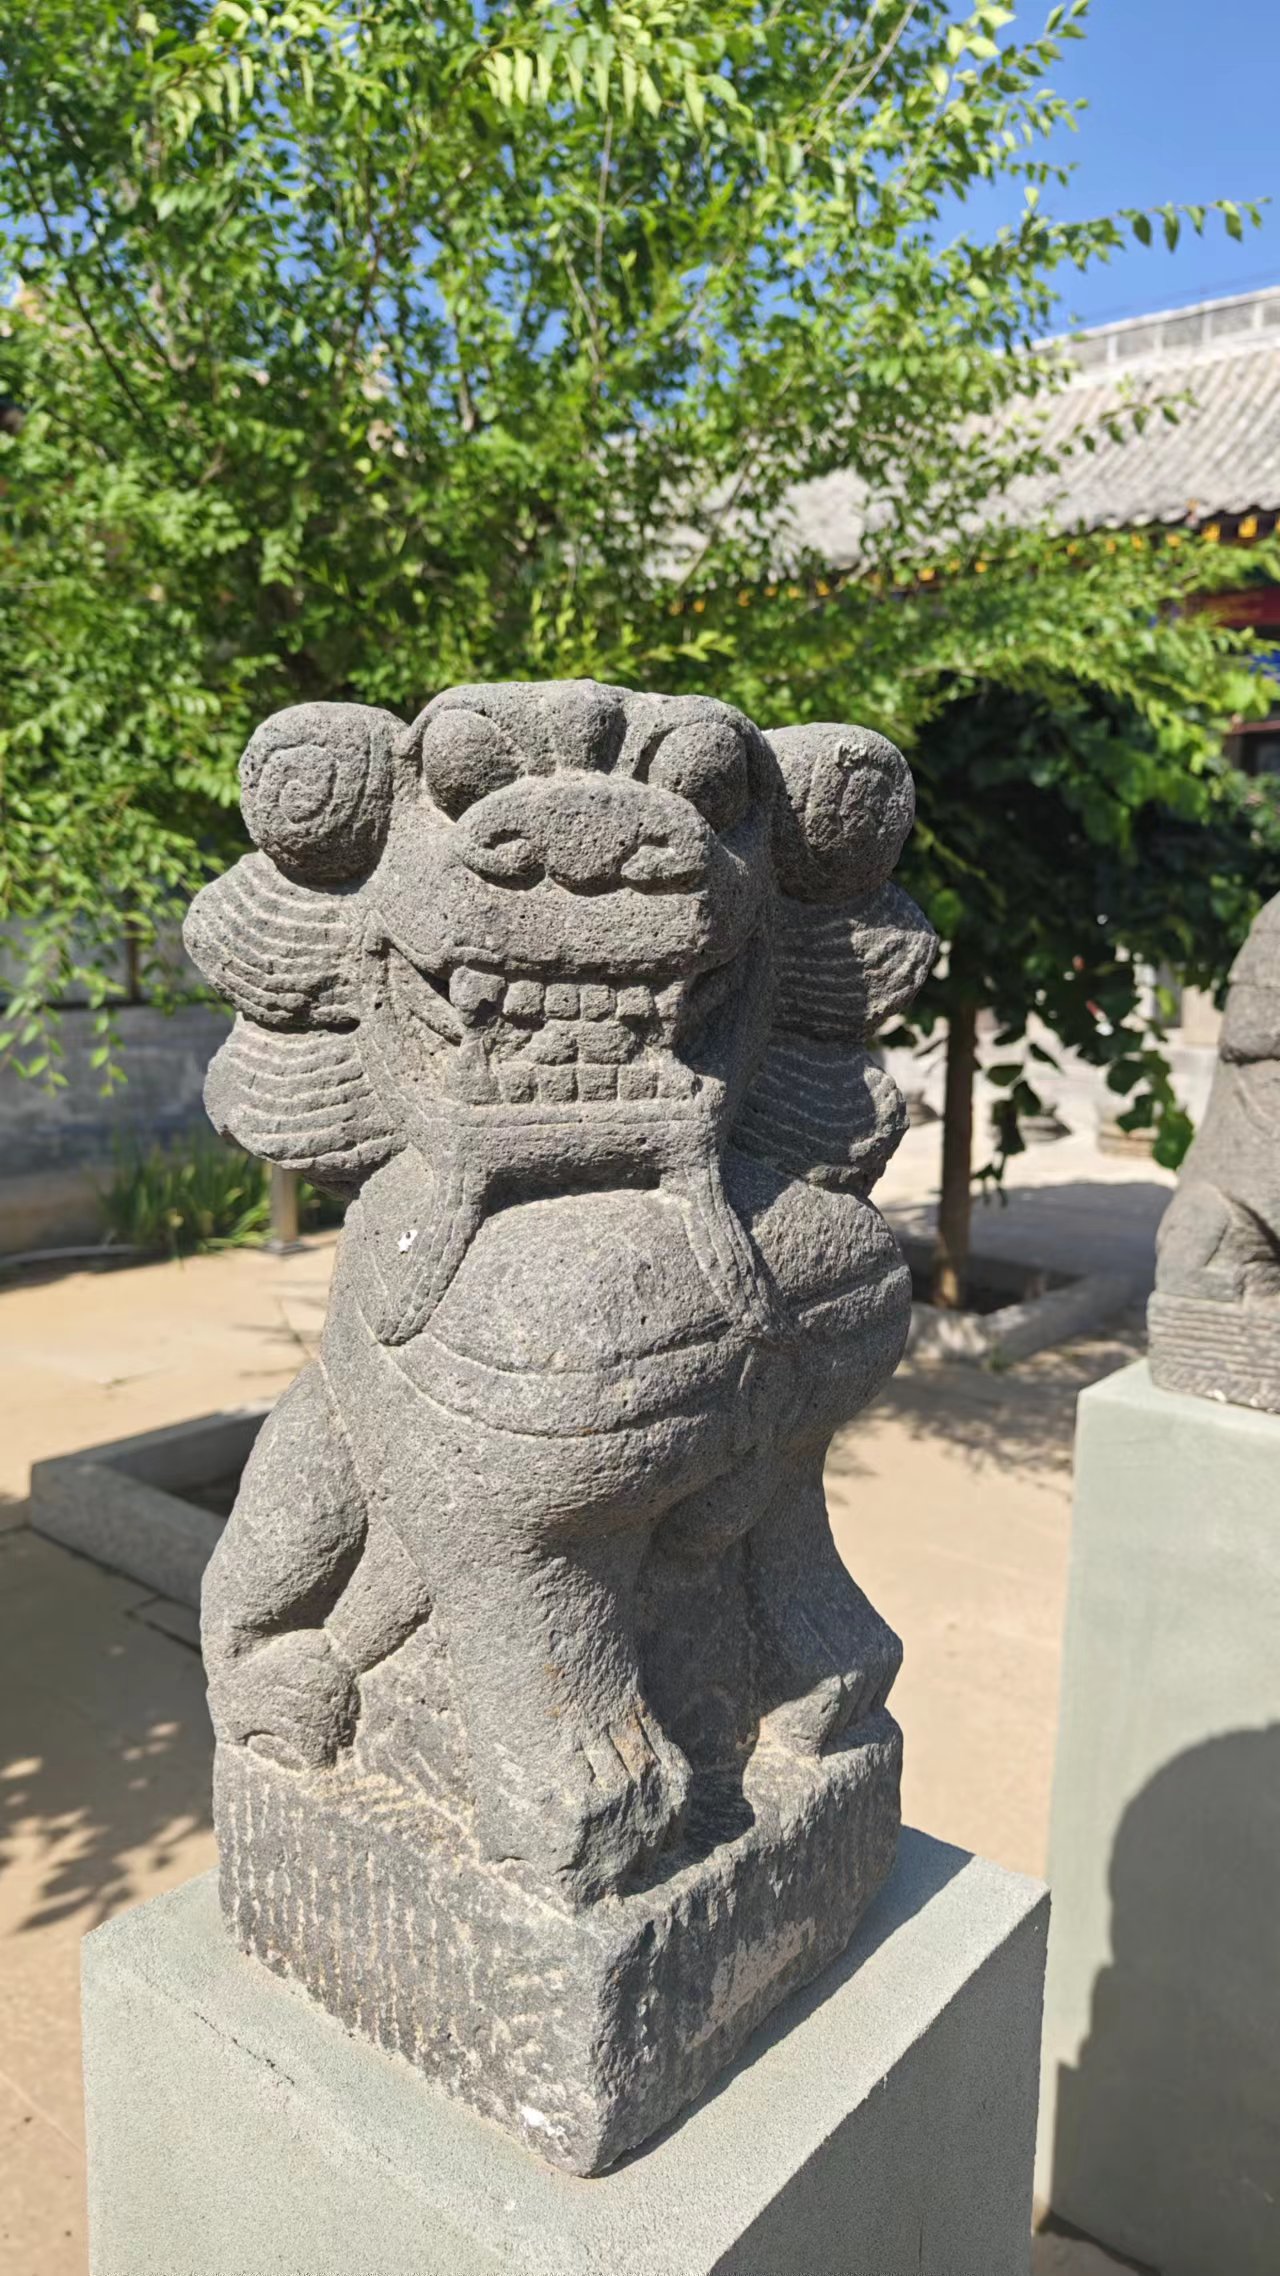 This undated photo shows a stone lion in north China's Inner Mongolia Autonomous Region. /CGTN